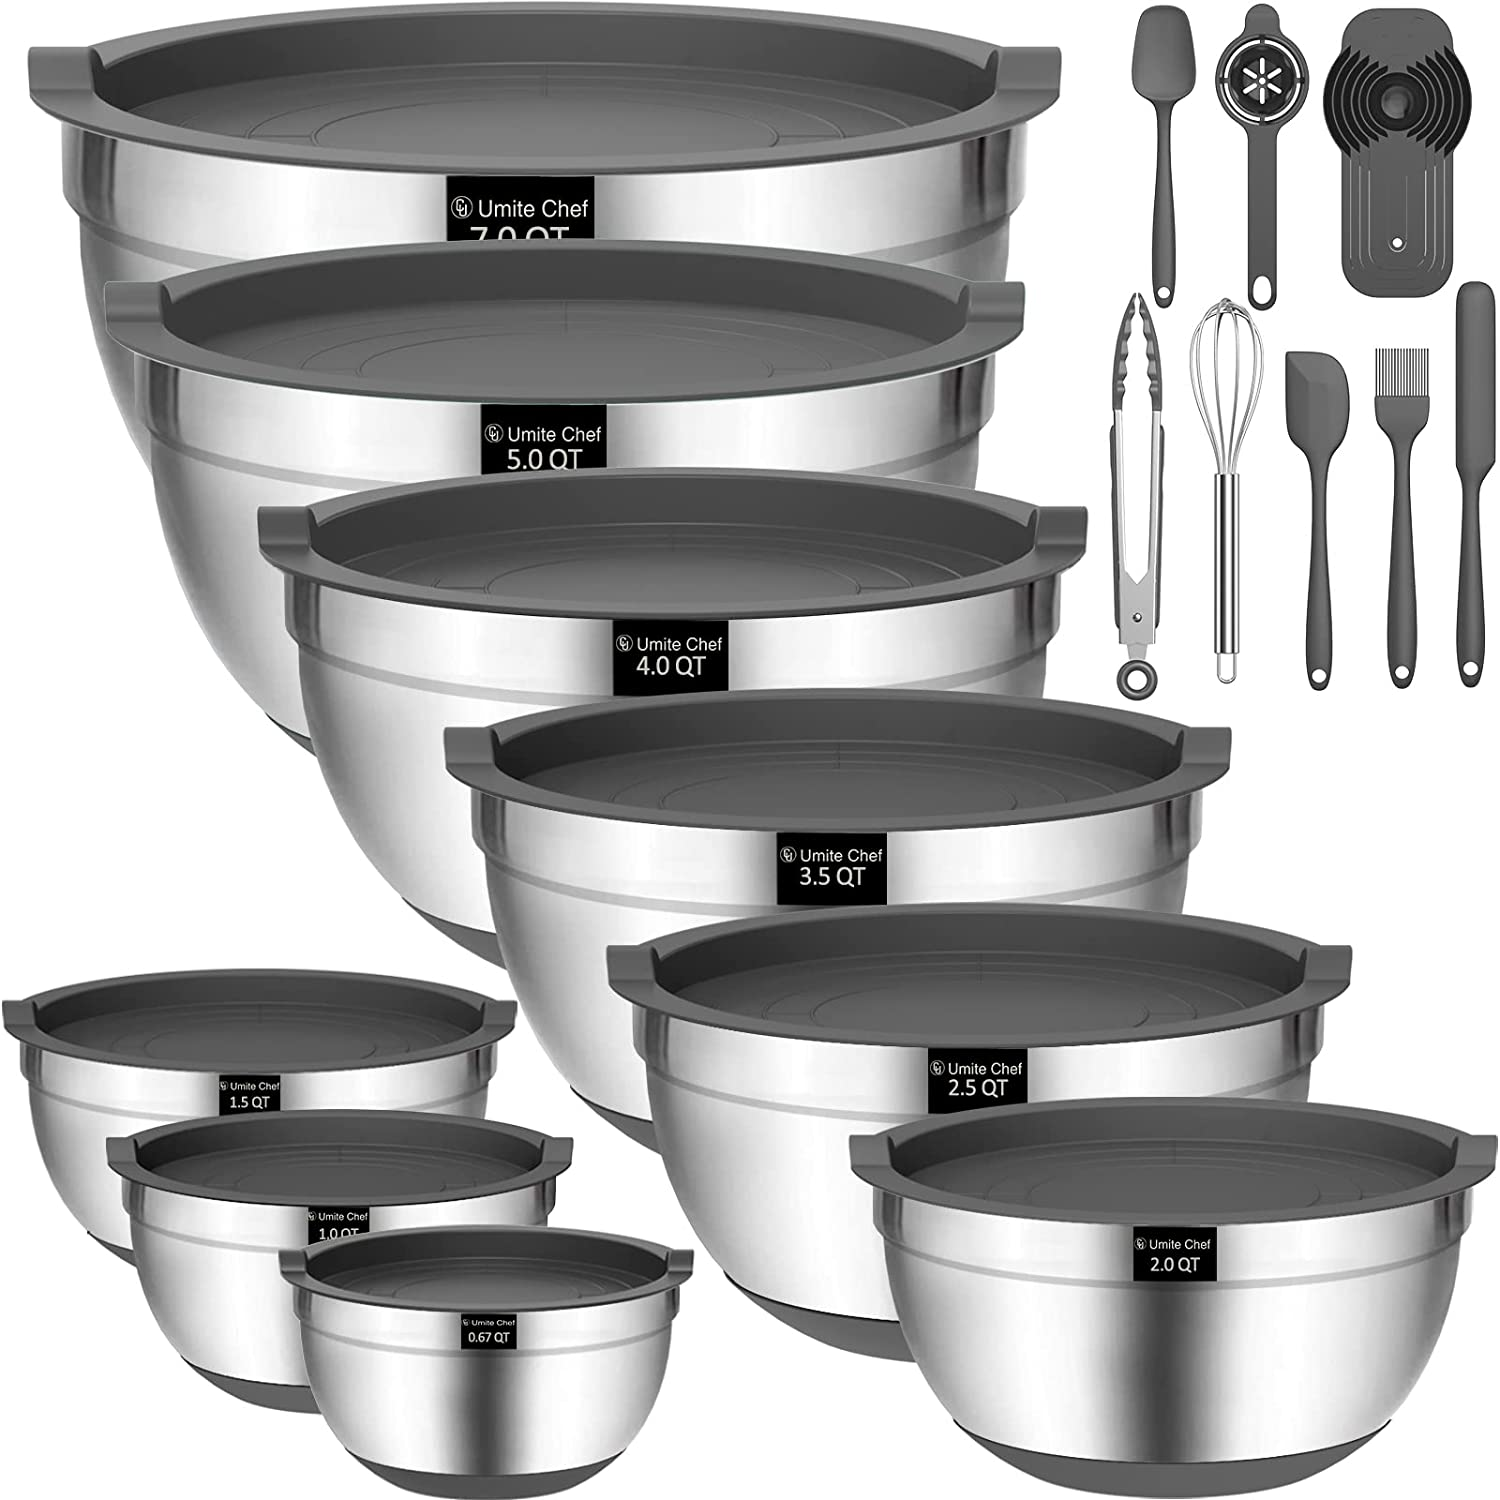 YIHONG 7 Piece Mixing Bowls with Lids for Kitchen, Stainless Steel Mixing  Bowls Set Ideal for Baking, Prepping, Cooking and Serving Food, Nesting